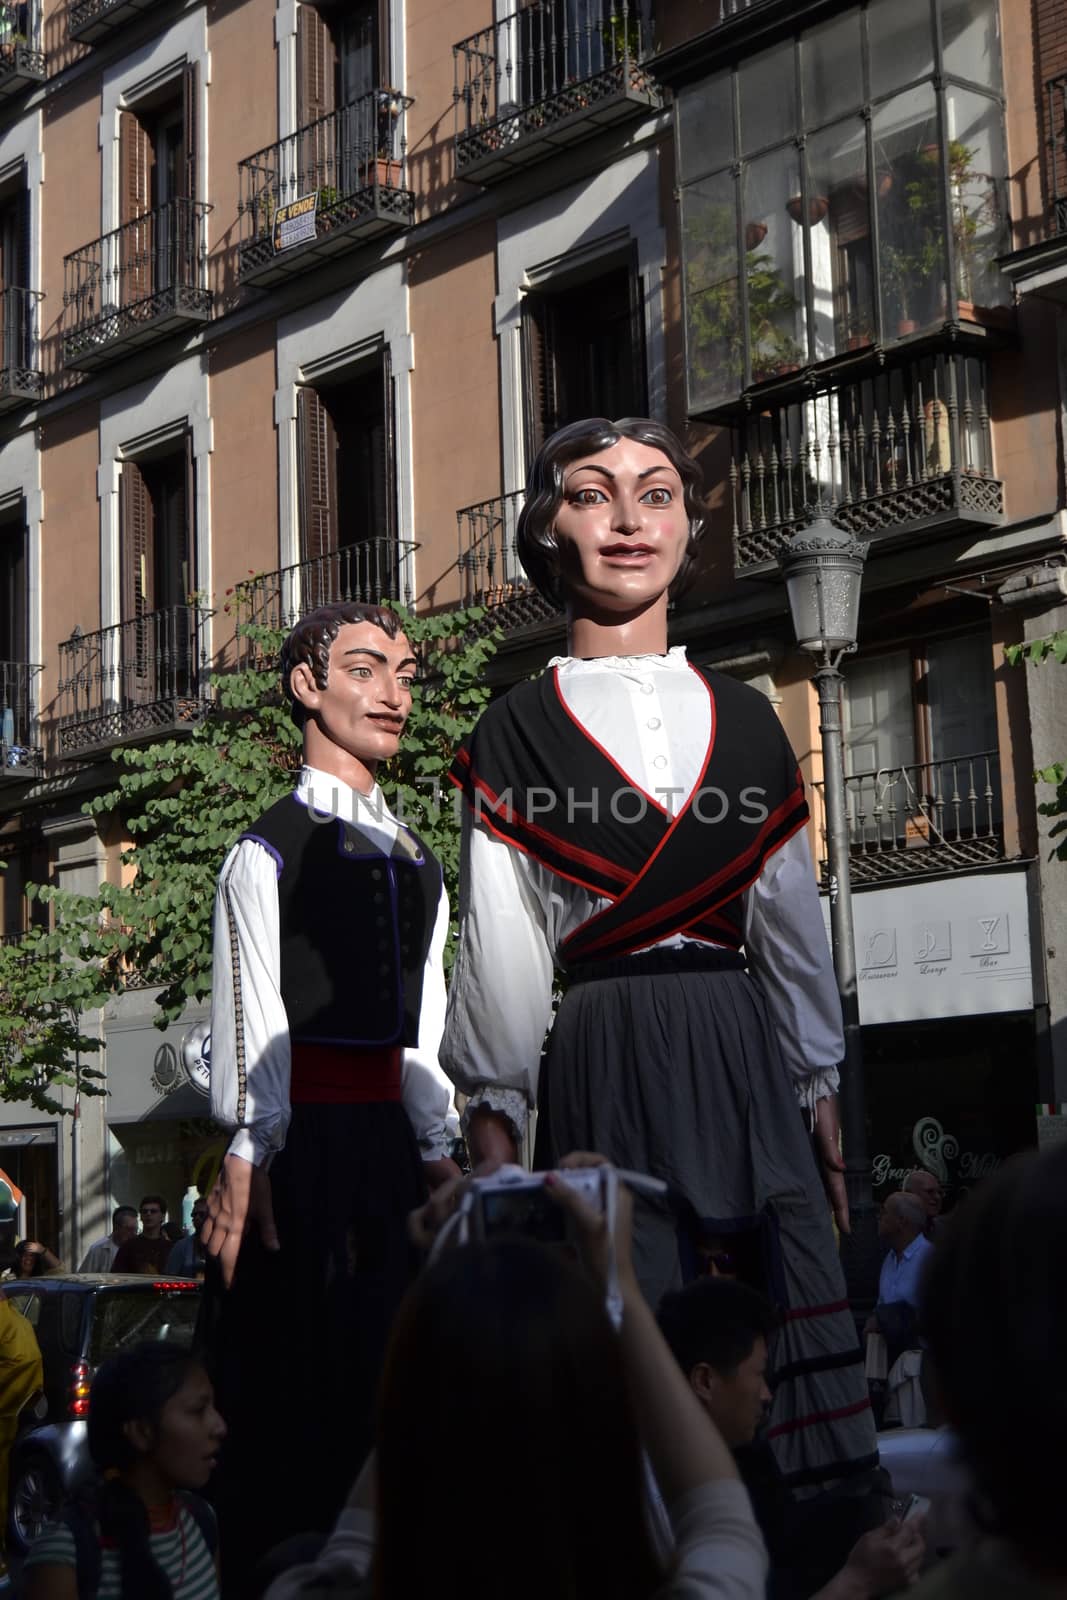 Giants and big heads in calle Mayor, Madrid by ncuisinier